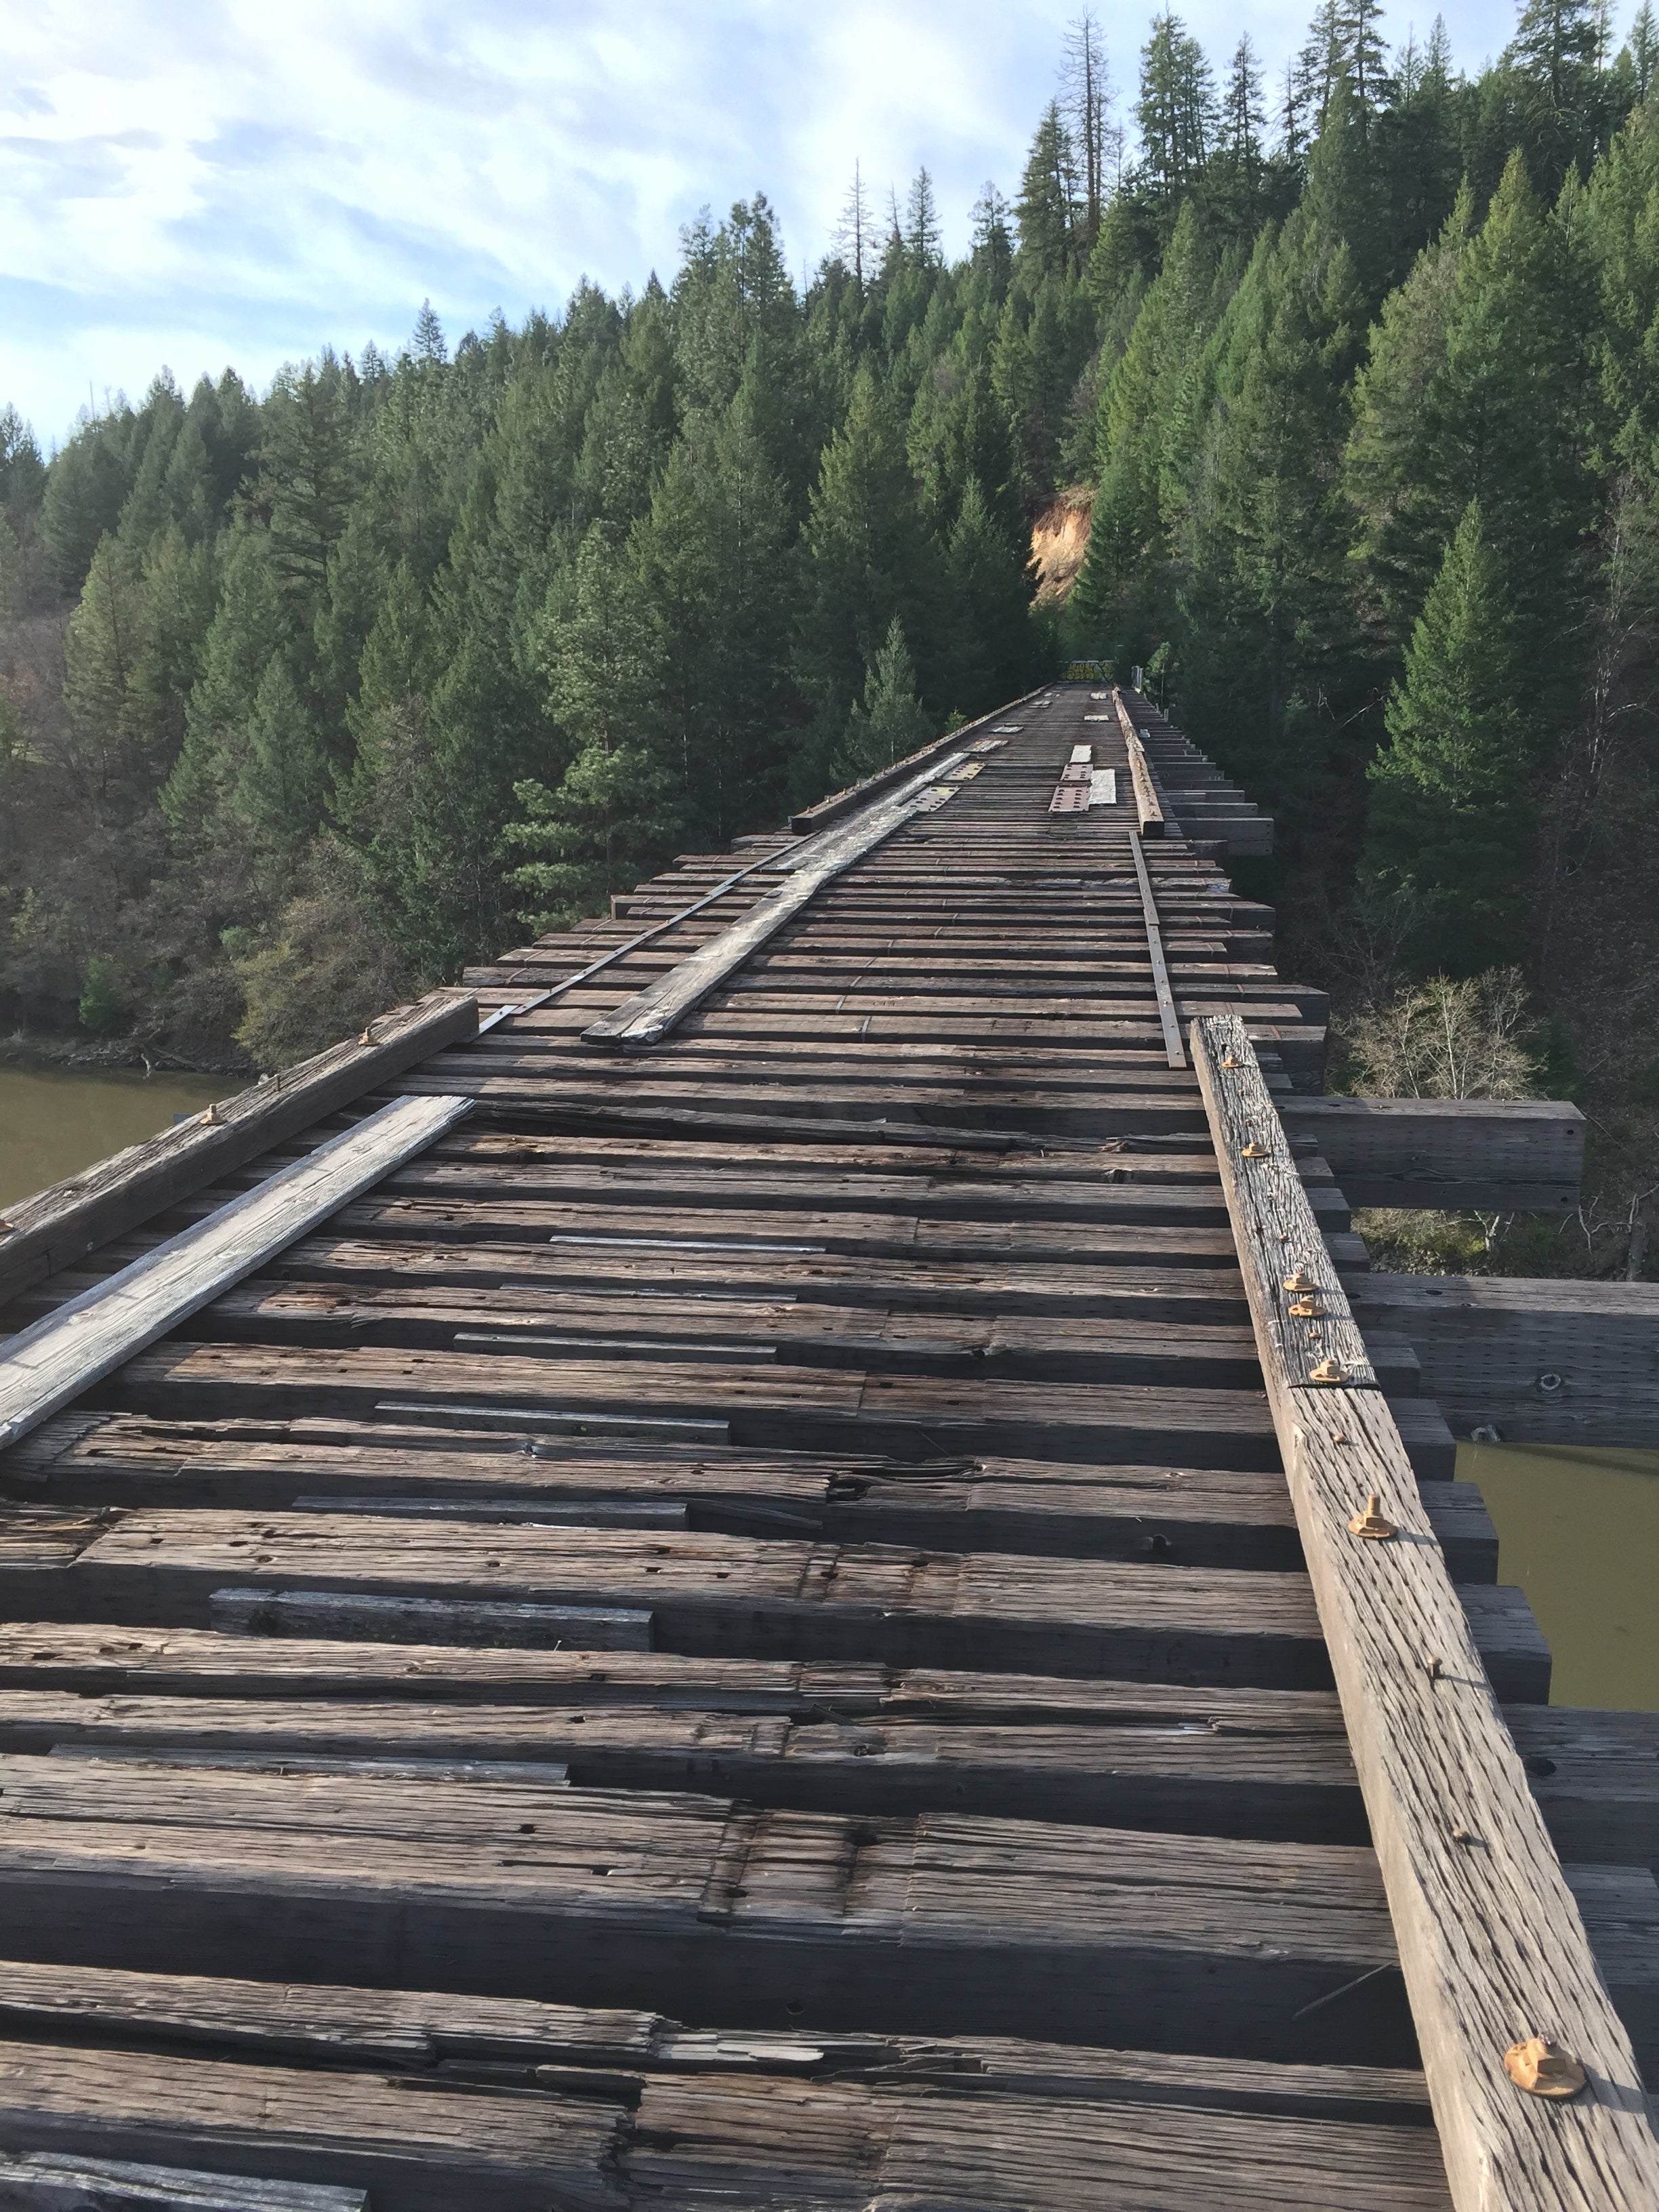 The old bridge/railroad from the movie Stand By Me